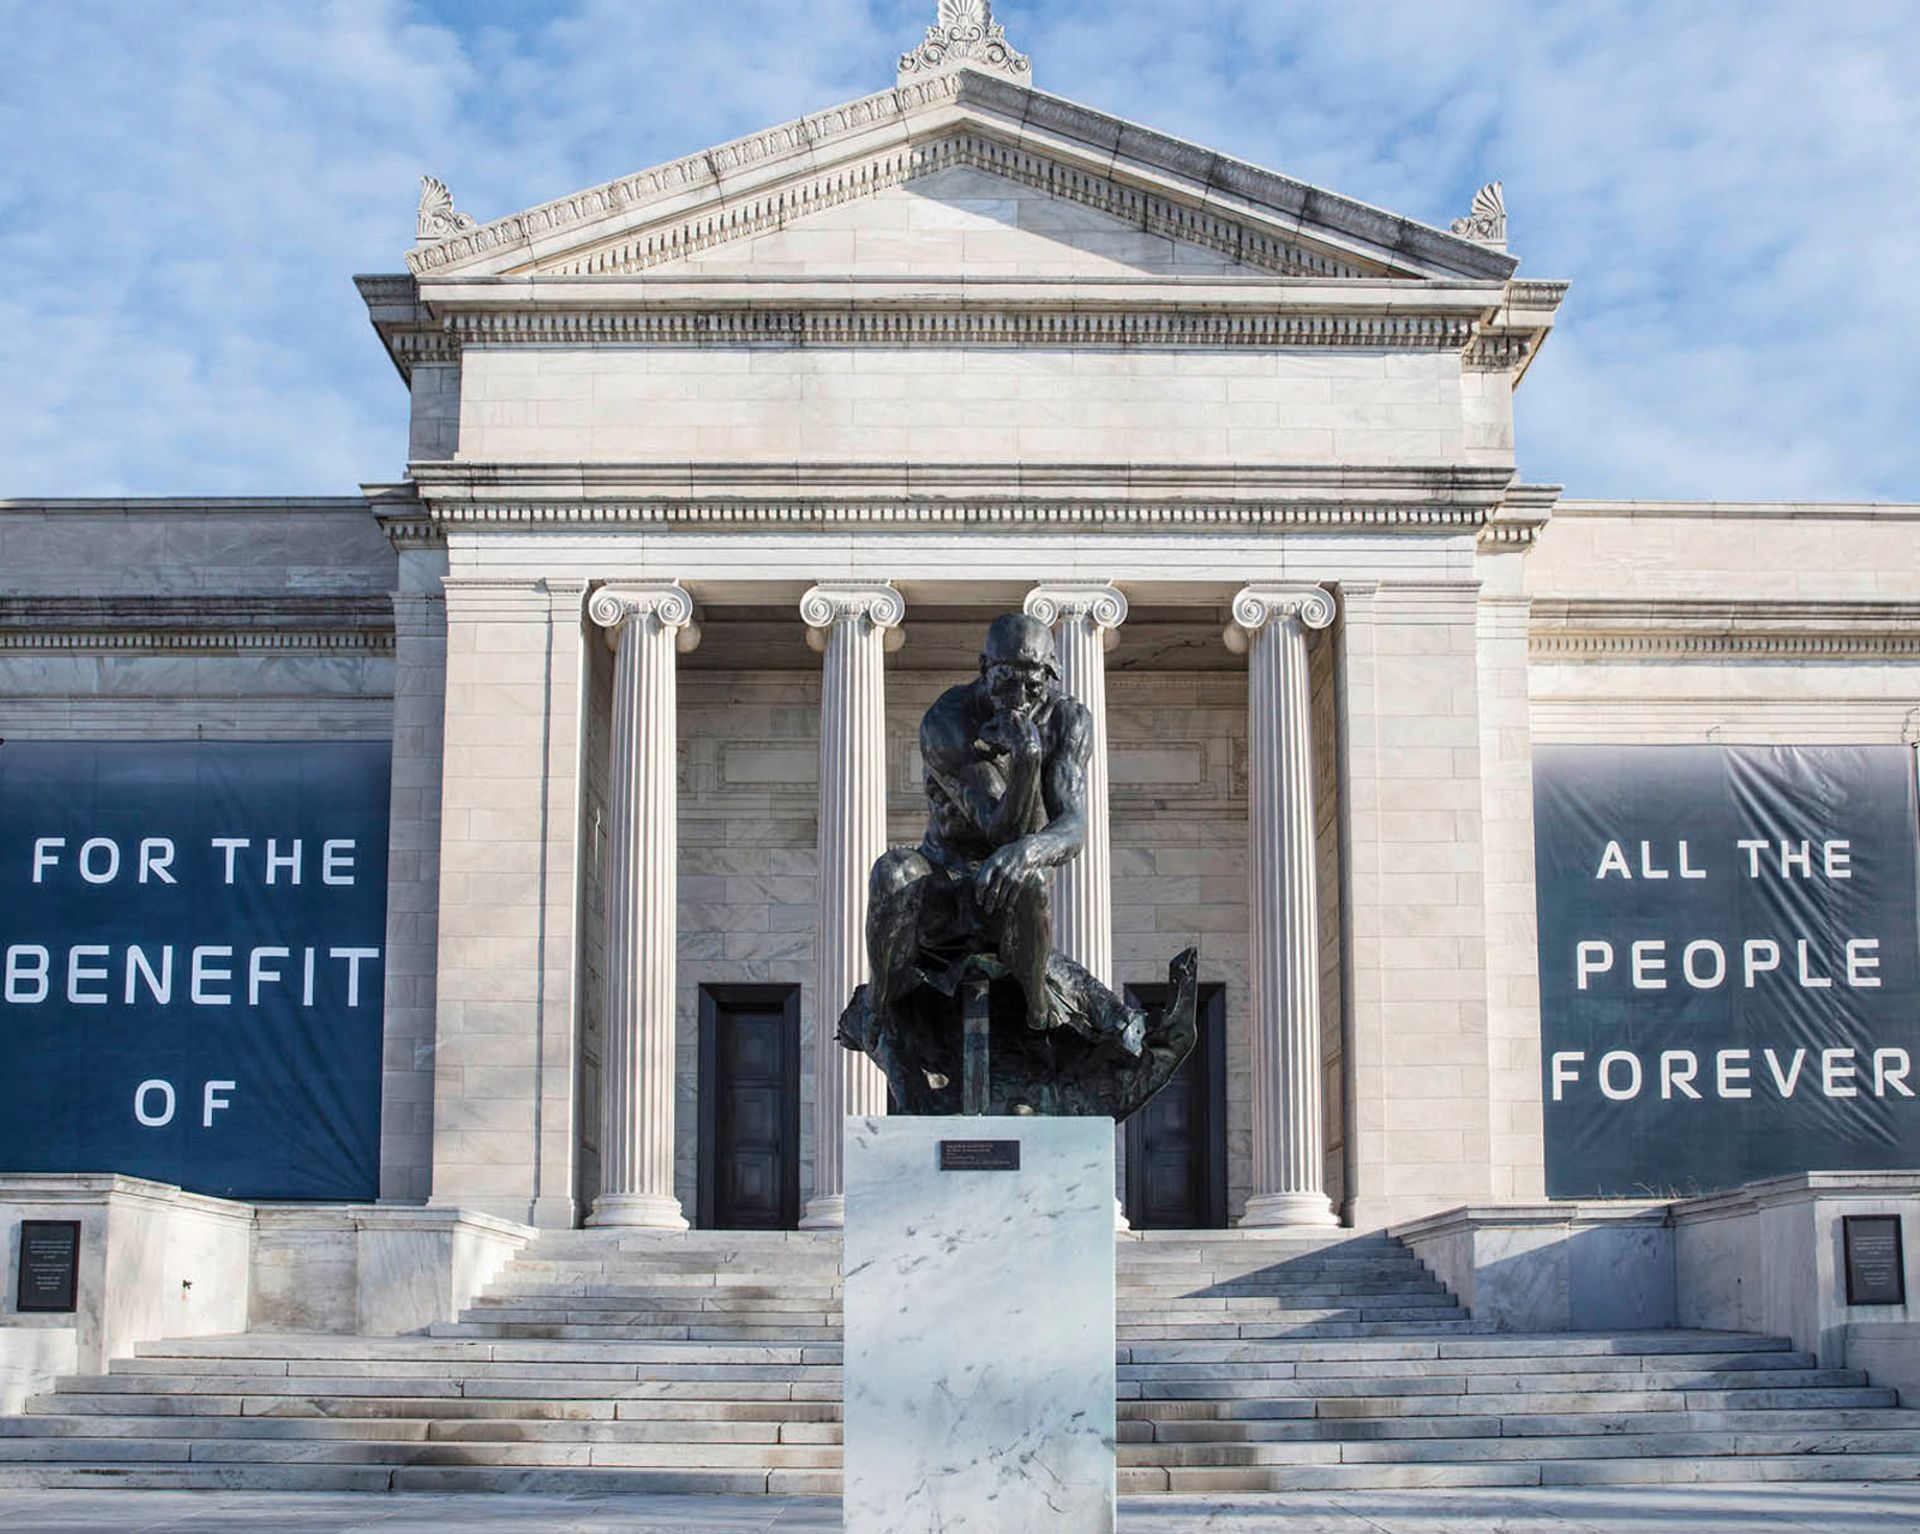 “For the Benefit of All the People Forever” banners on the Cleveland Museum of Art's building Cleveland Museum of Art